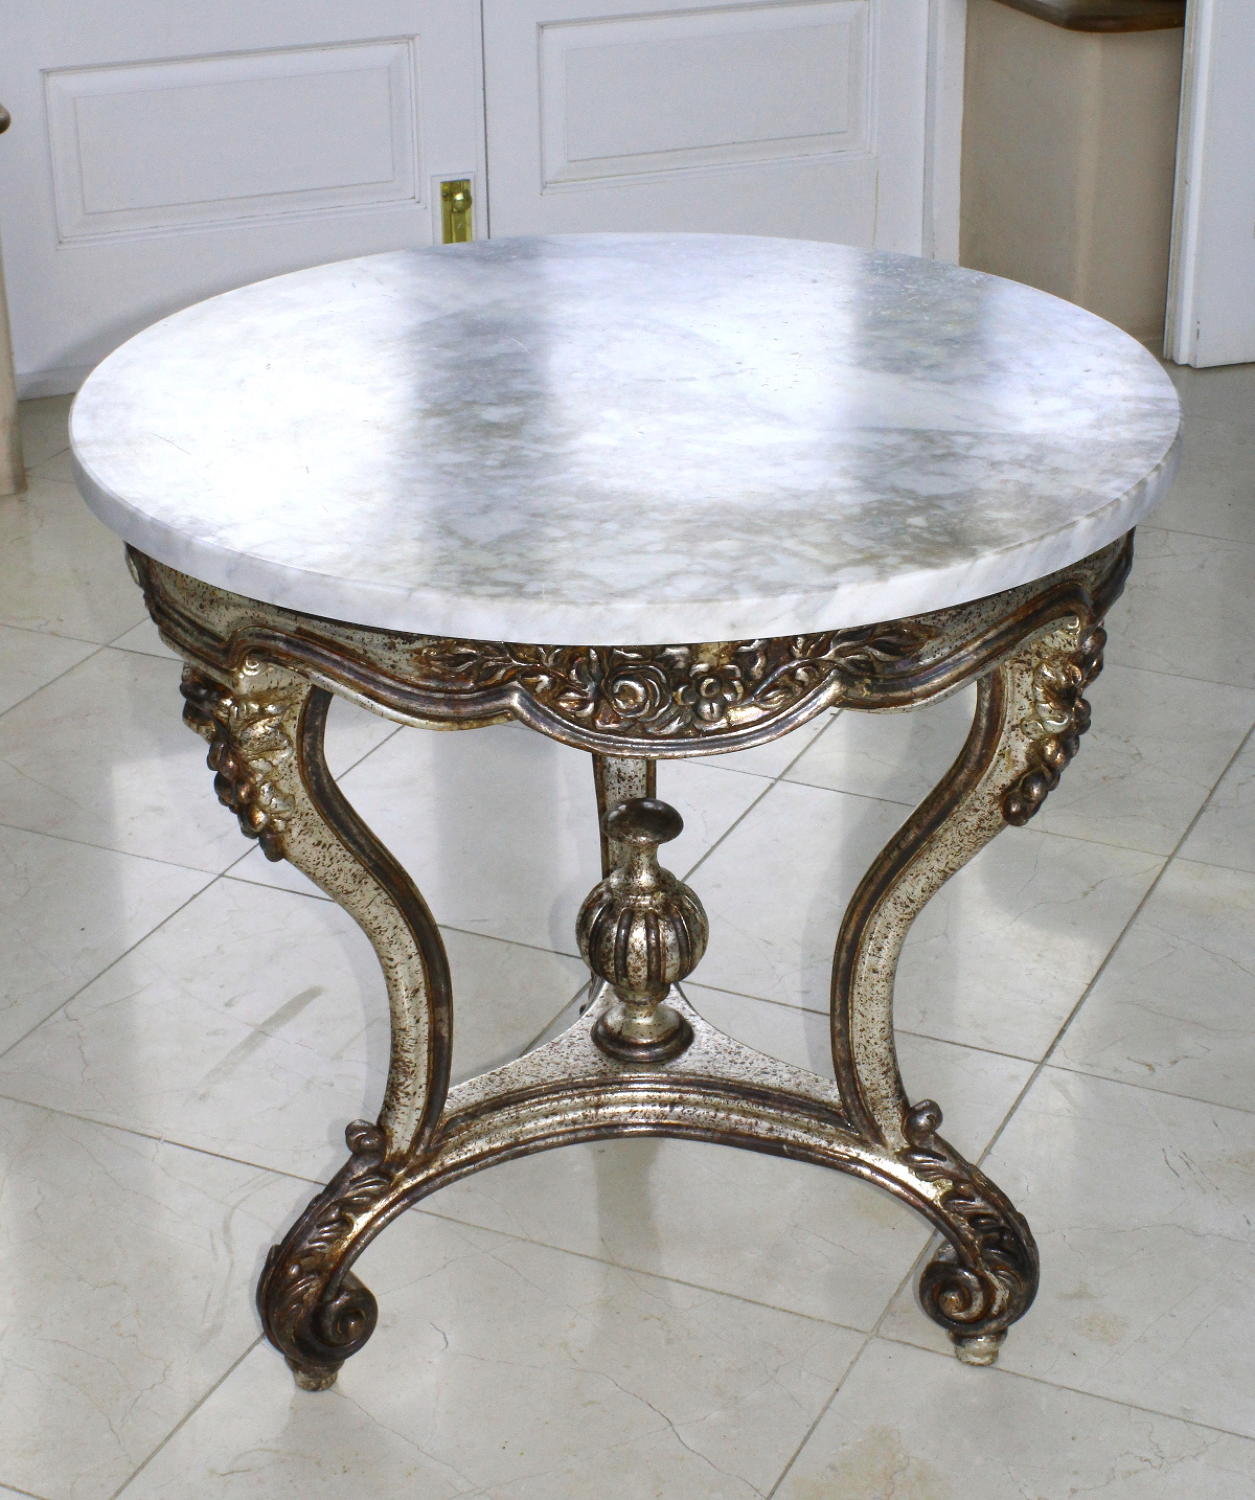 Round table with silverleafed base